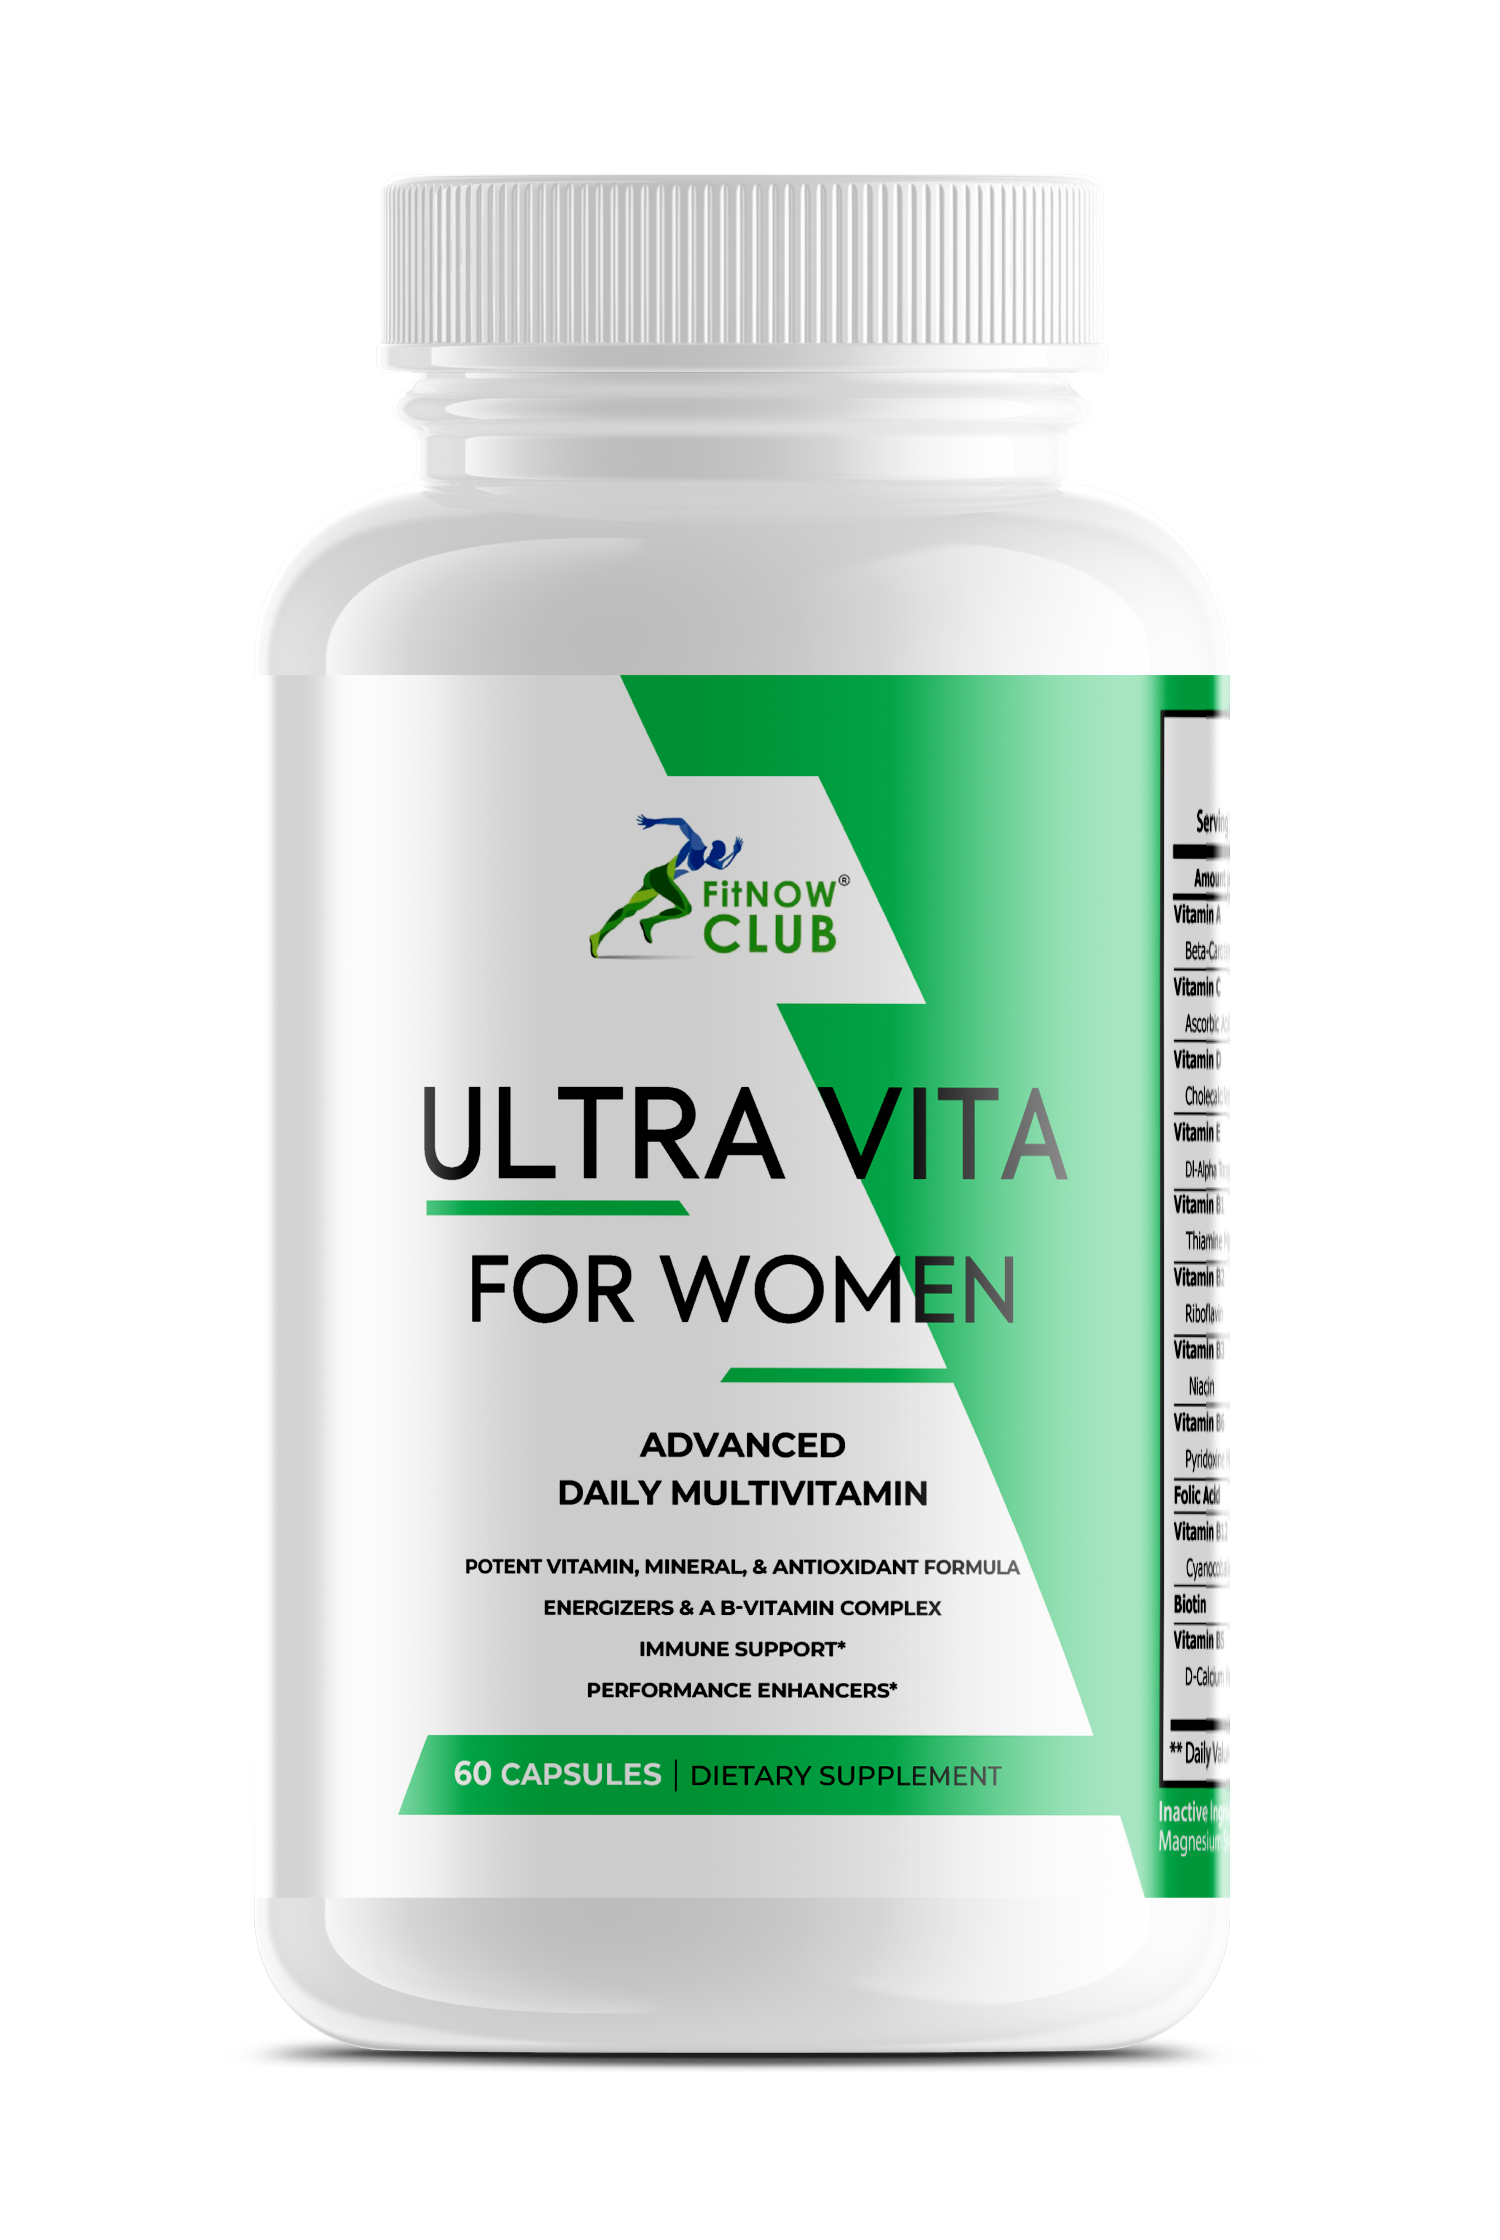 Ultra Vita for Women-1 pack (60 count) - FitNOW Club